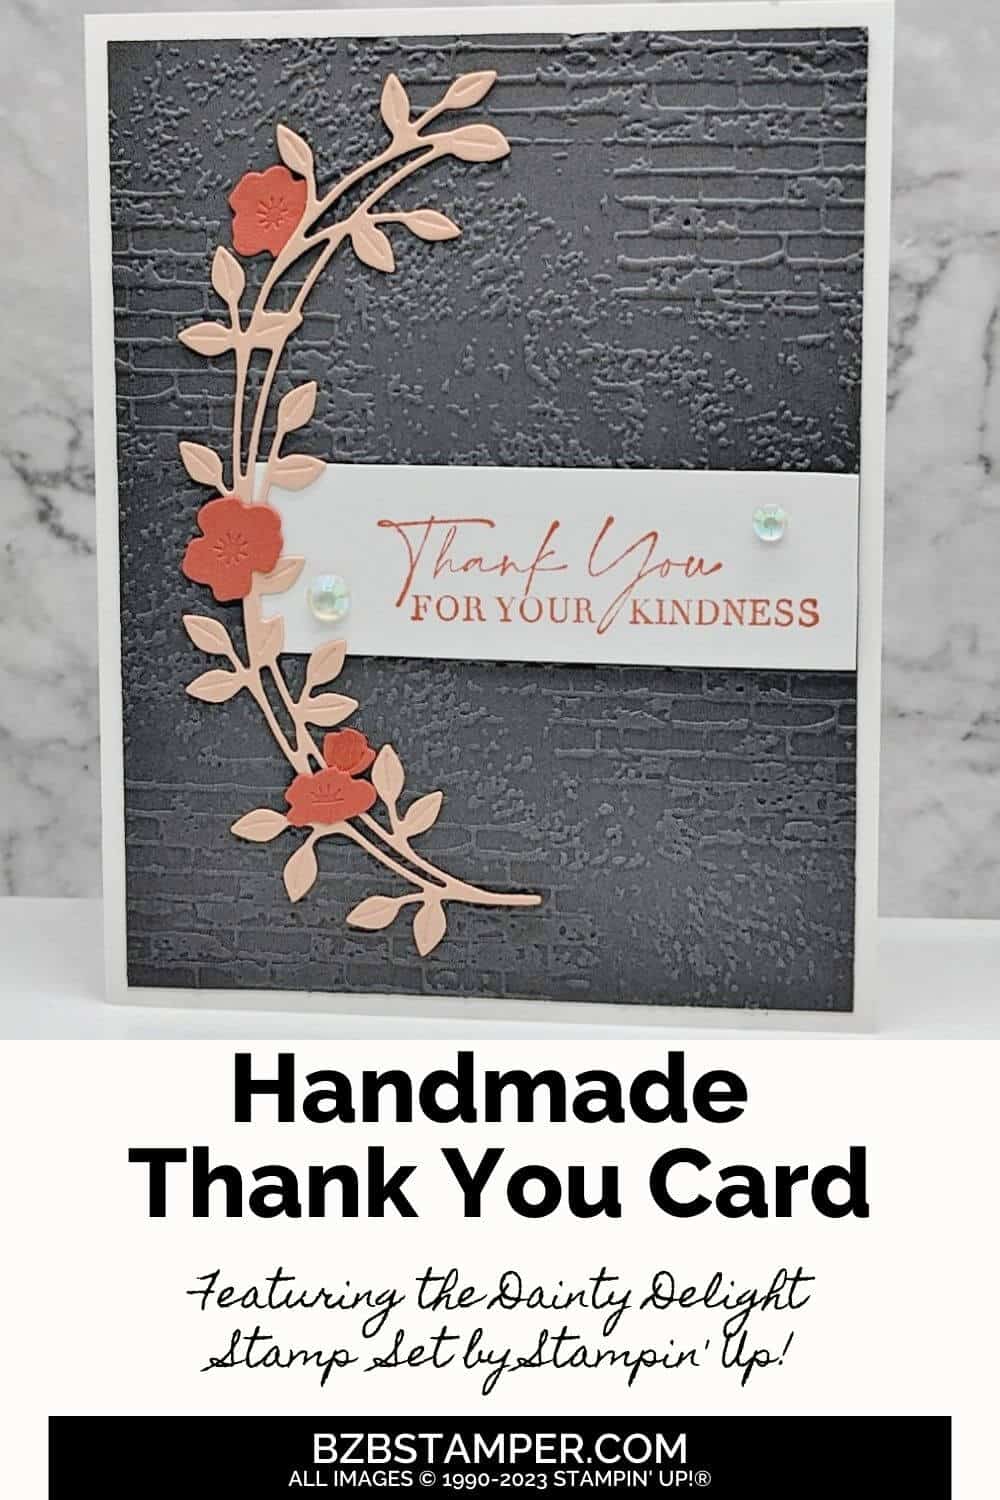 Thank You Card featuring the Dainty Delight Stamp Set & Dies in gray and pinks.  There is an embossed image that looks like a brick background as well as pink stems with coral flowers.